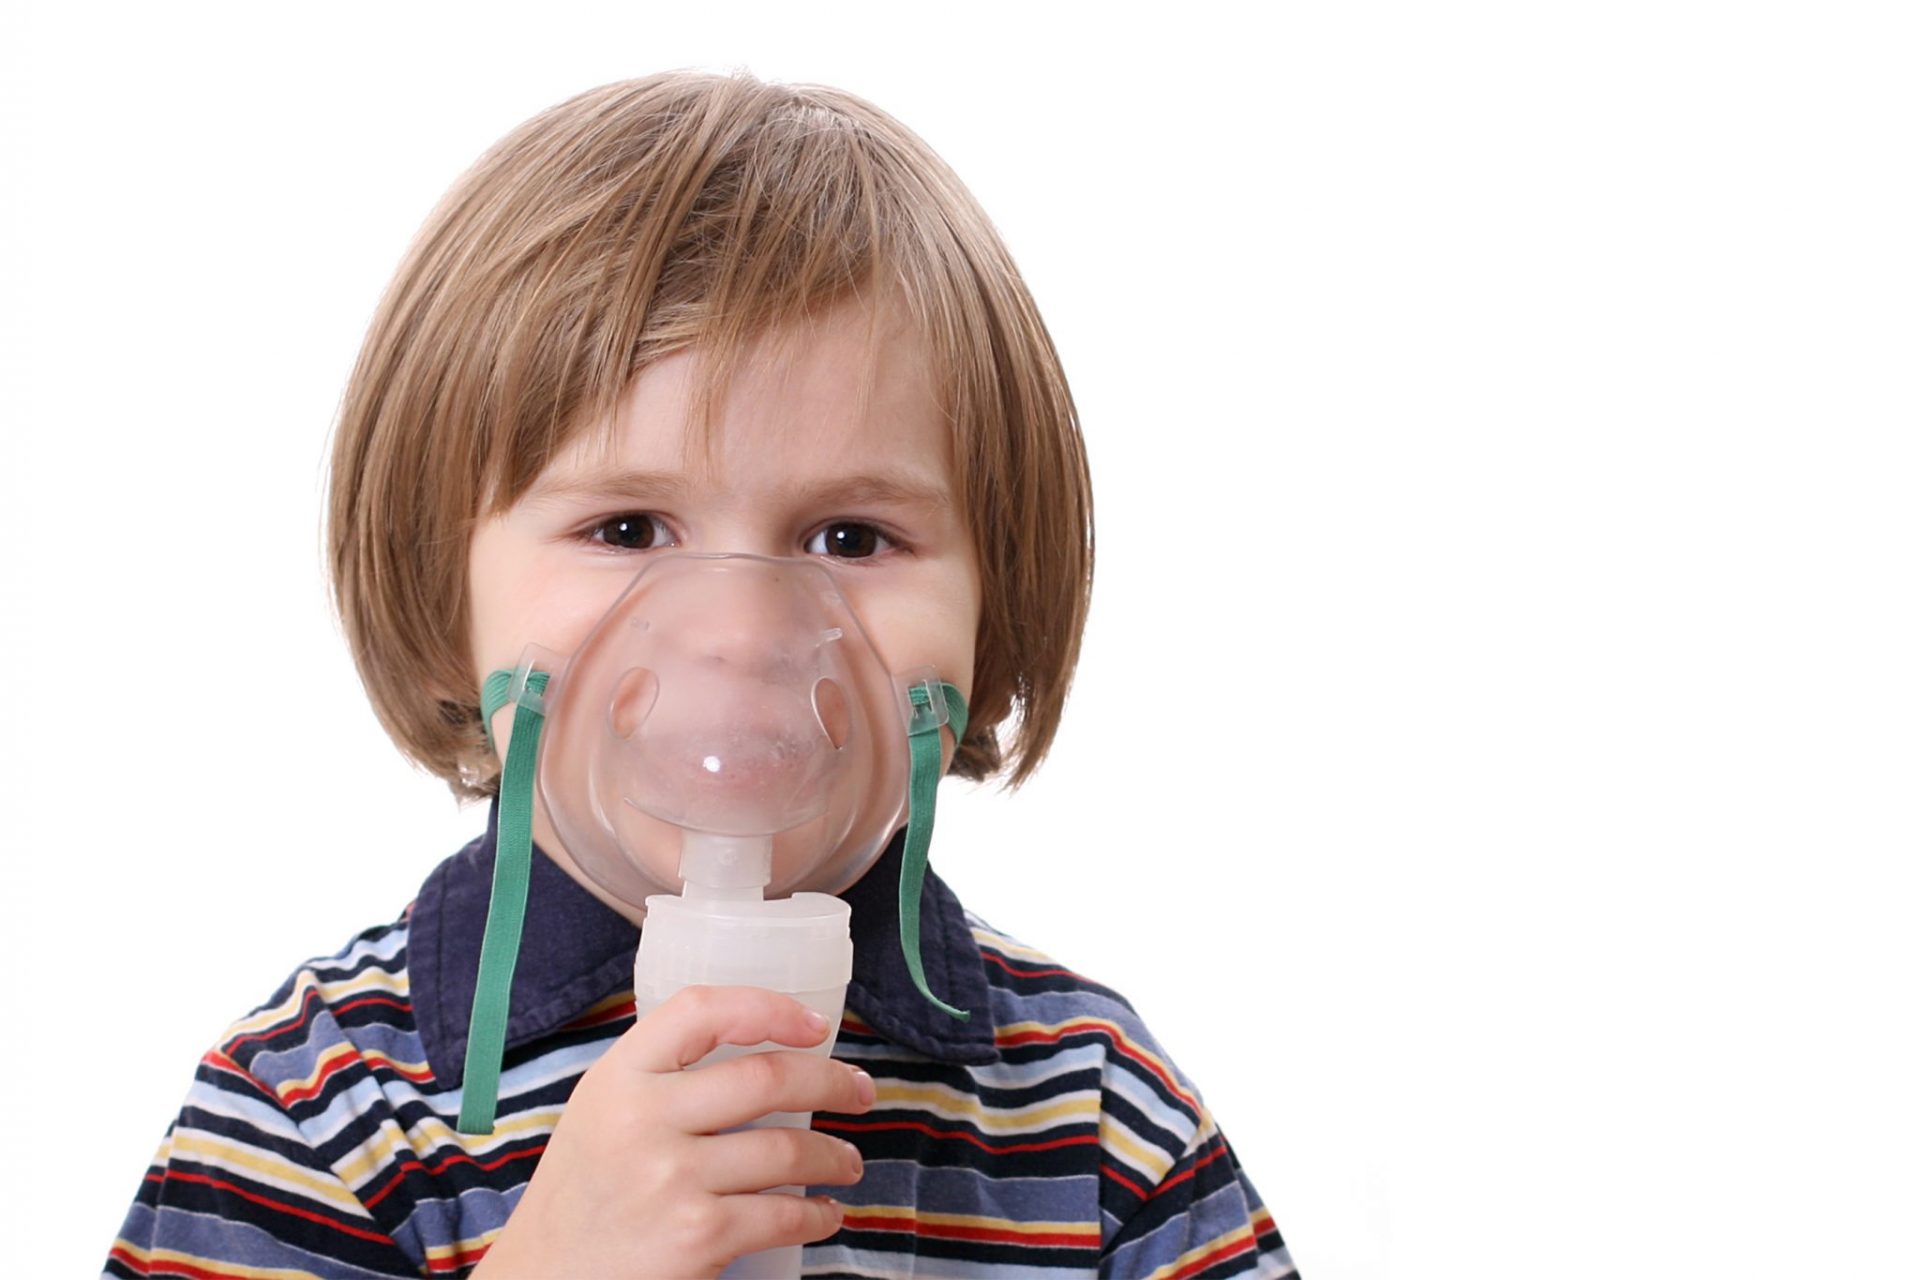 Antibiotic Use in Infants Linked to Asthma & Autism | Natural Health 365